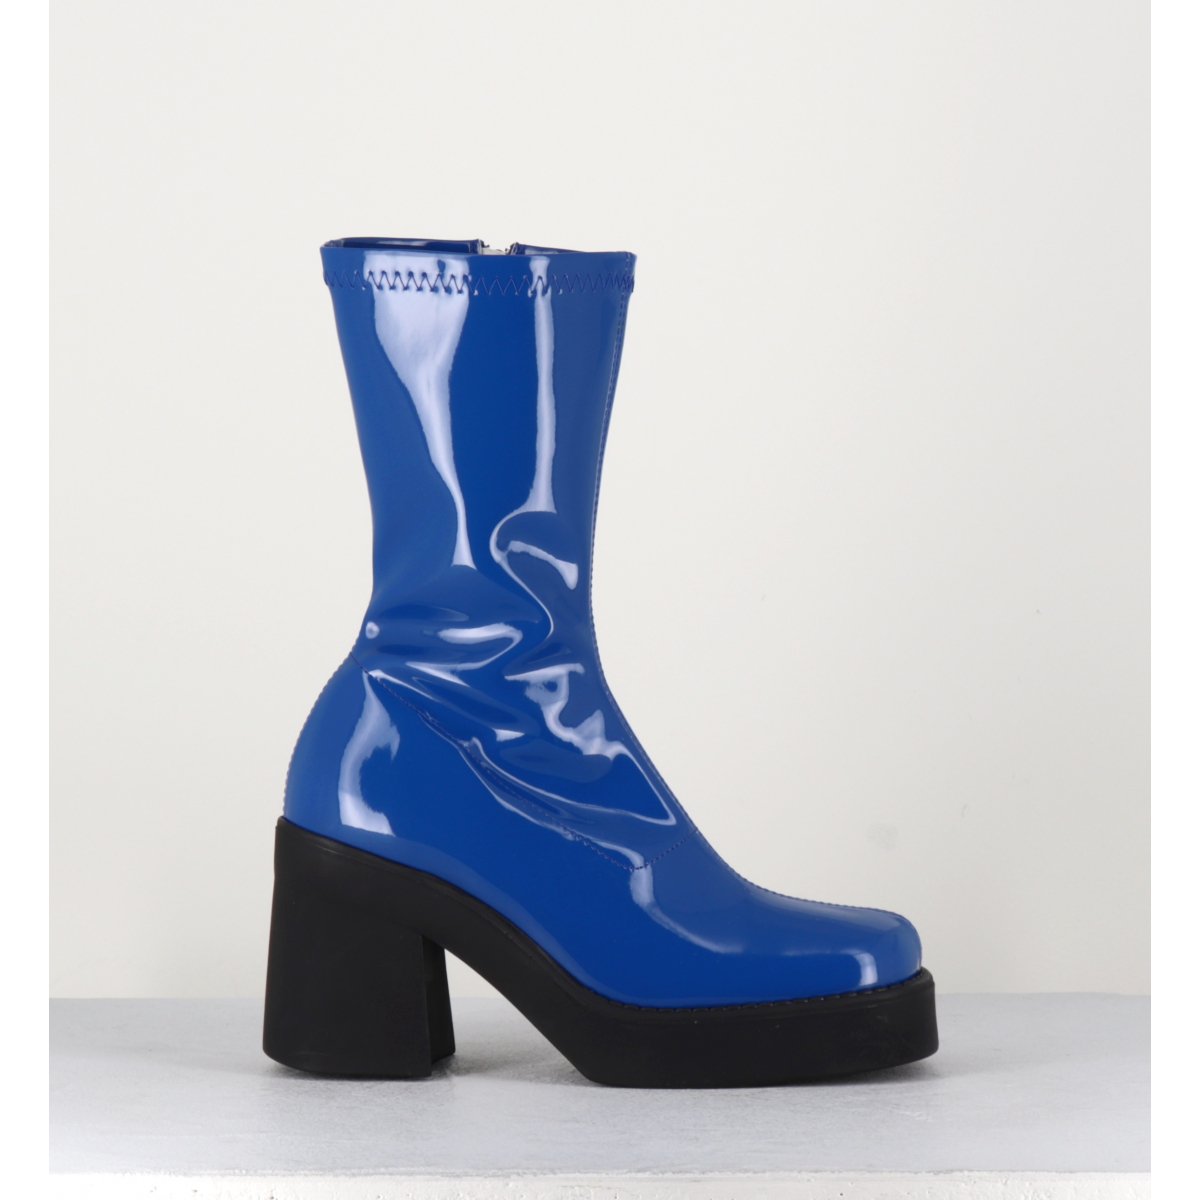 NOELY BLUE BOOTS